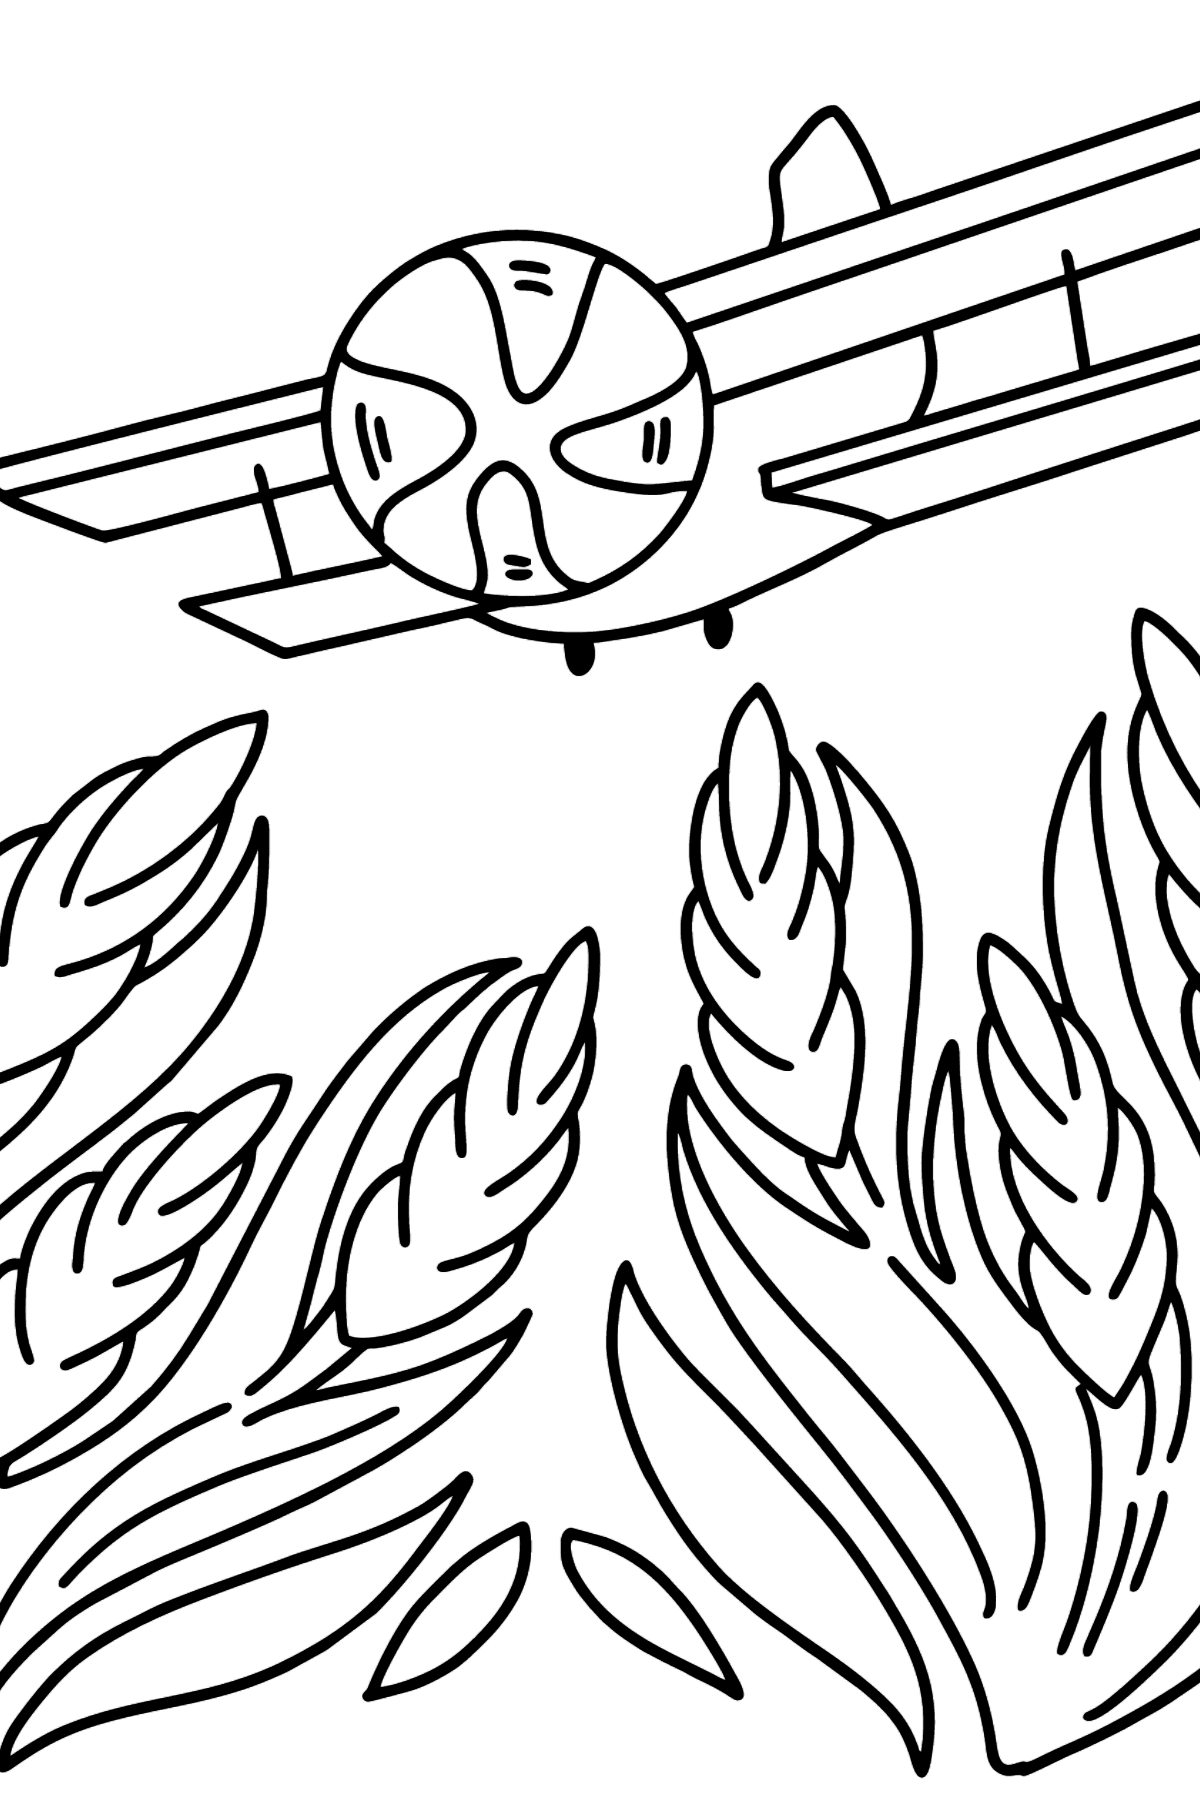 Airplane AN-2 coloring page - Coloring Pages for Kids